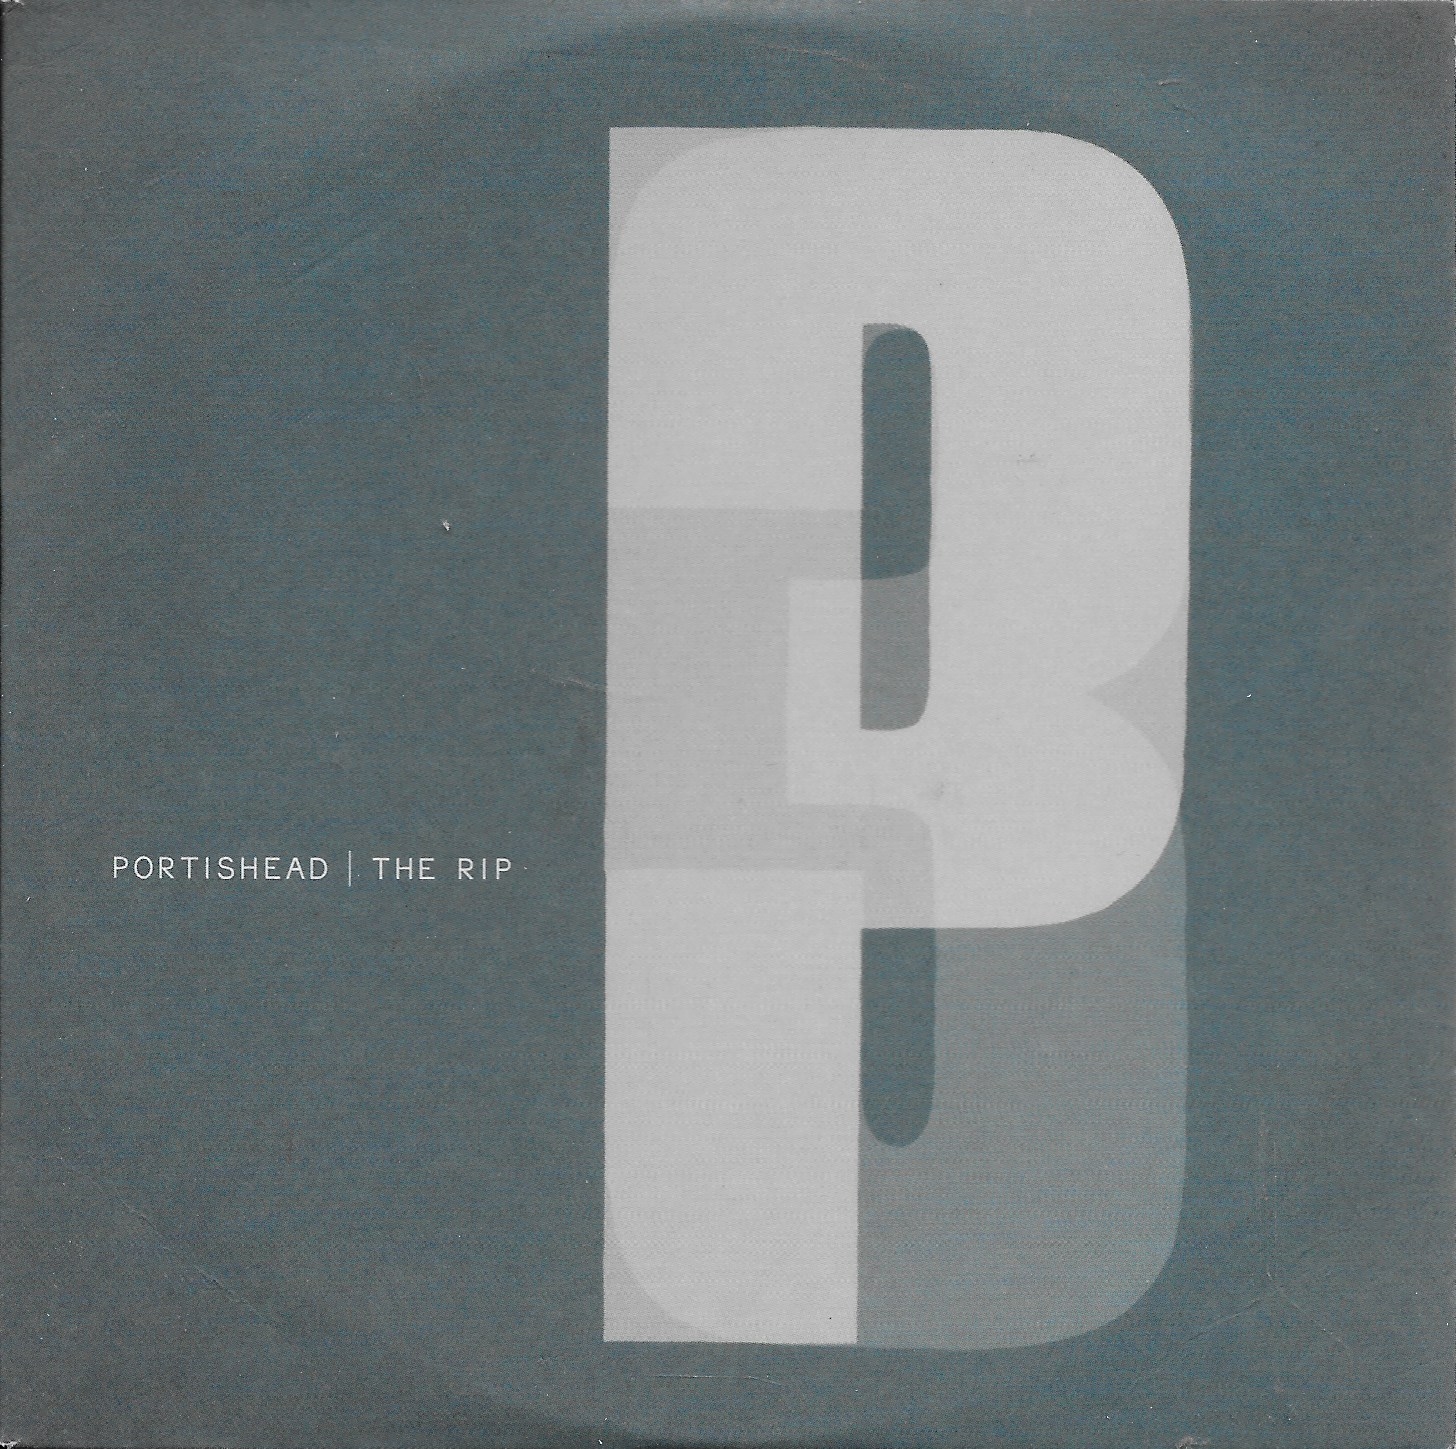 Picture of THERIPCD 01 The rip by artist Portishead 